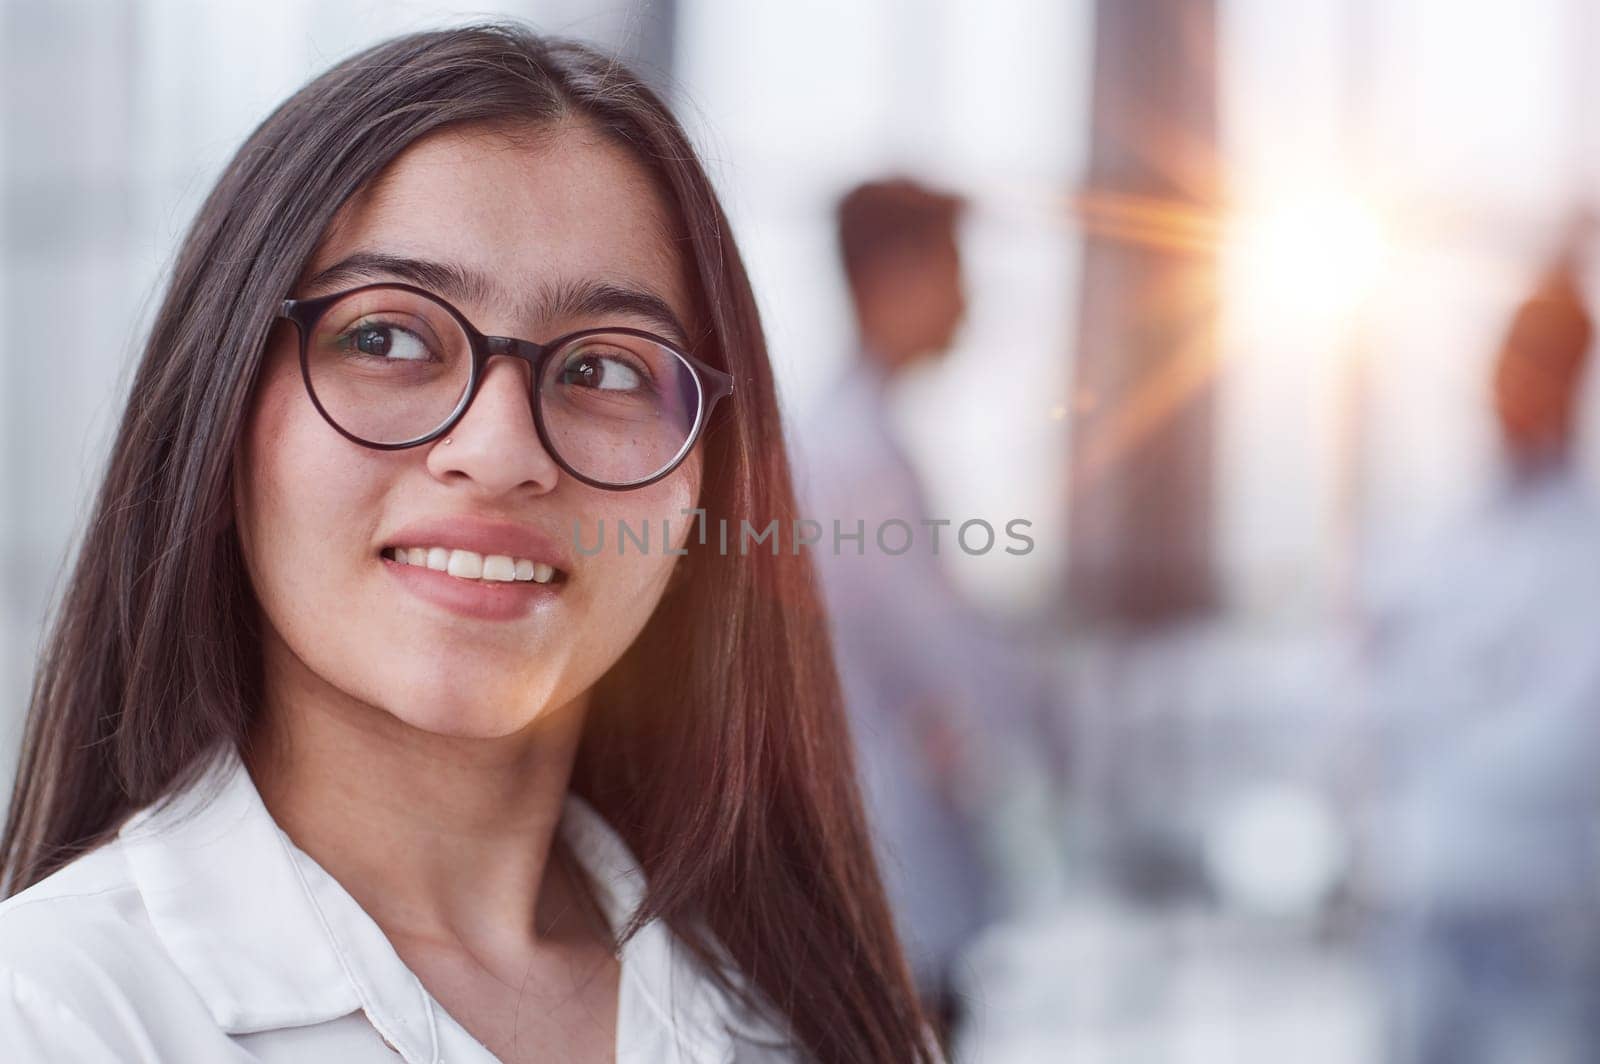 a girl stands in a modern office and looks at the camera